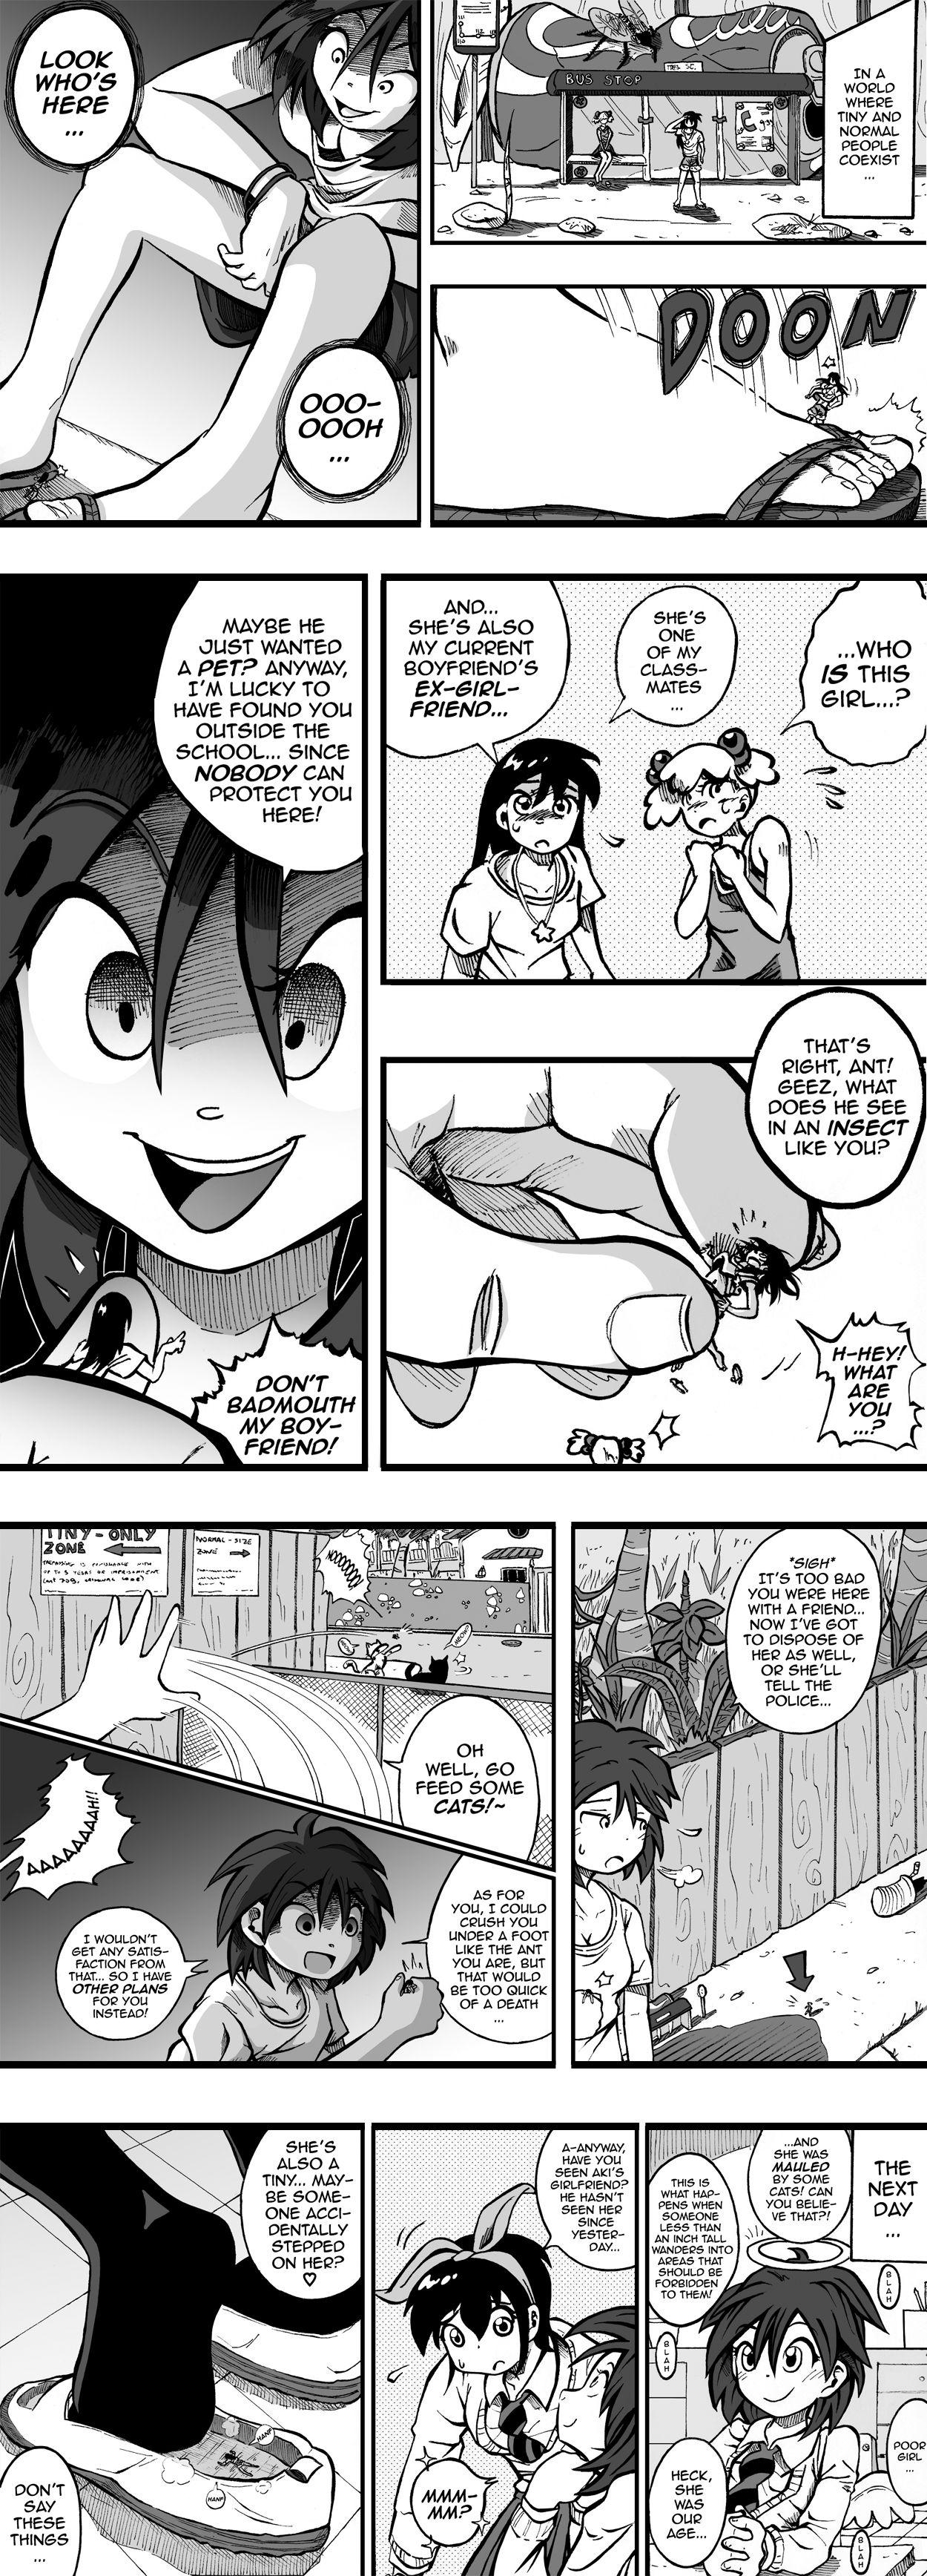 Bigbooty Half Inch High ( by labbaART ) Ongoing Sextoy - Page 3